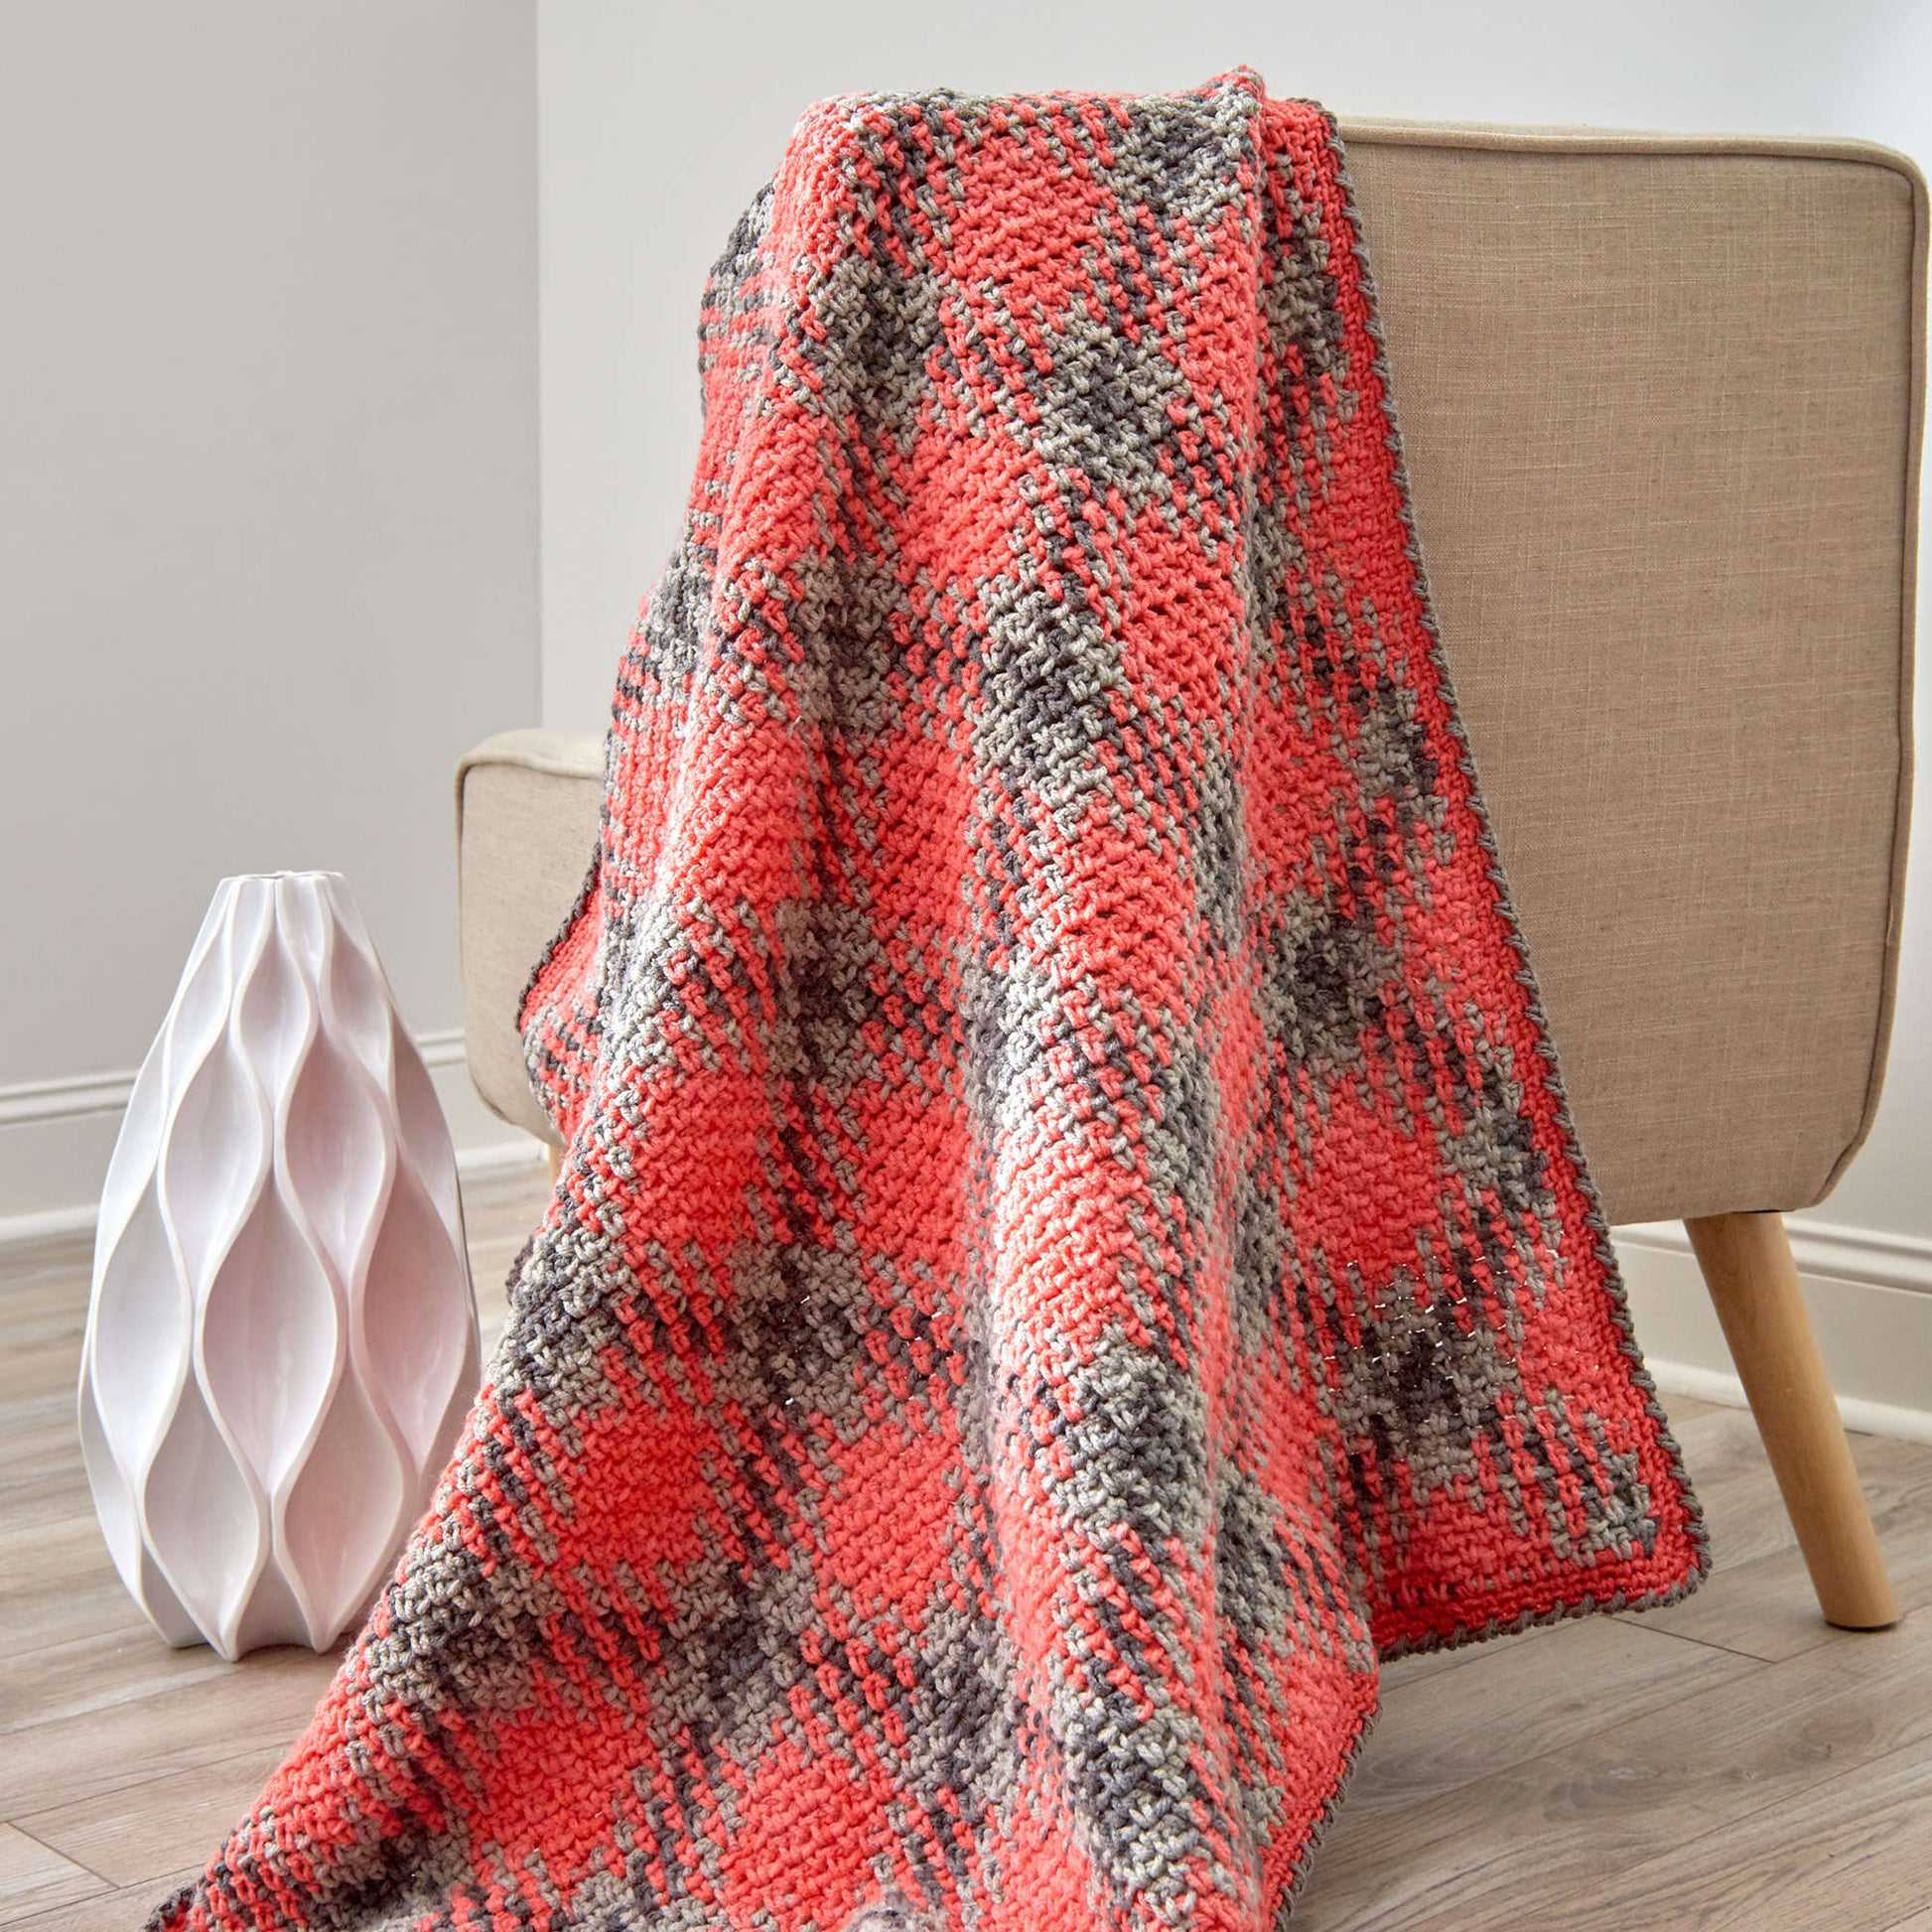 Free Red Heart Planned Pooling Argyle Throw Or Crochet Blanket Pattern